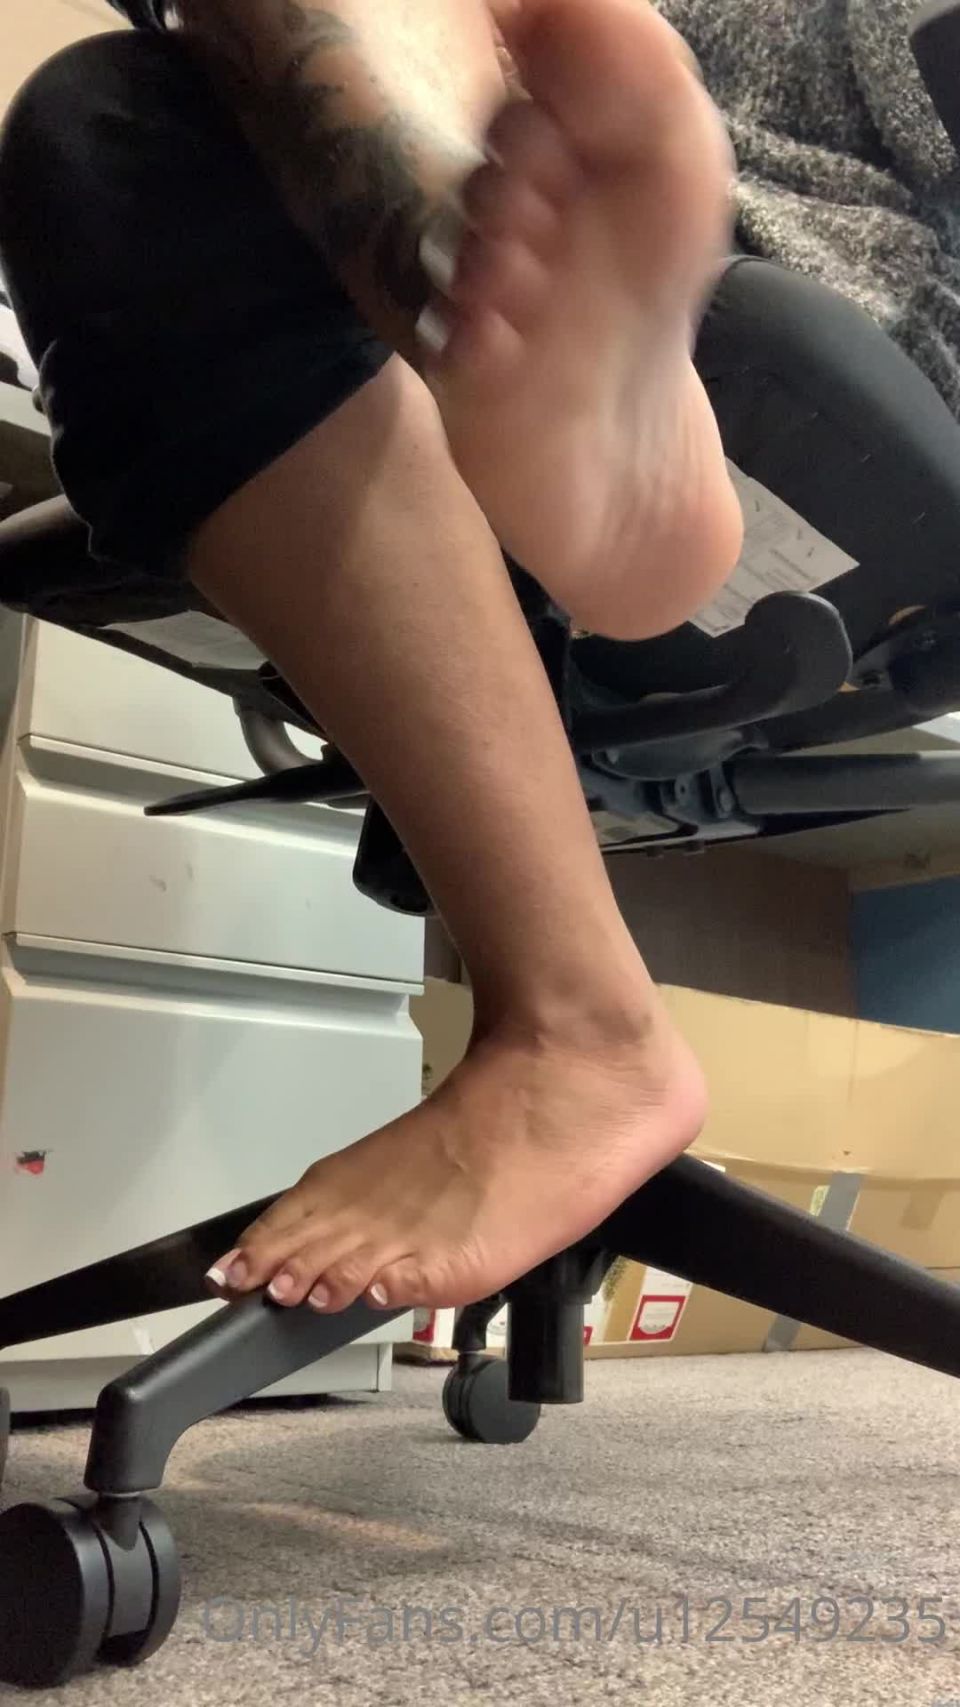 Sugared soles2 Sugaredsoles - sneaking foot videos at workmy coworker walked in on me 02-05-2020